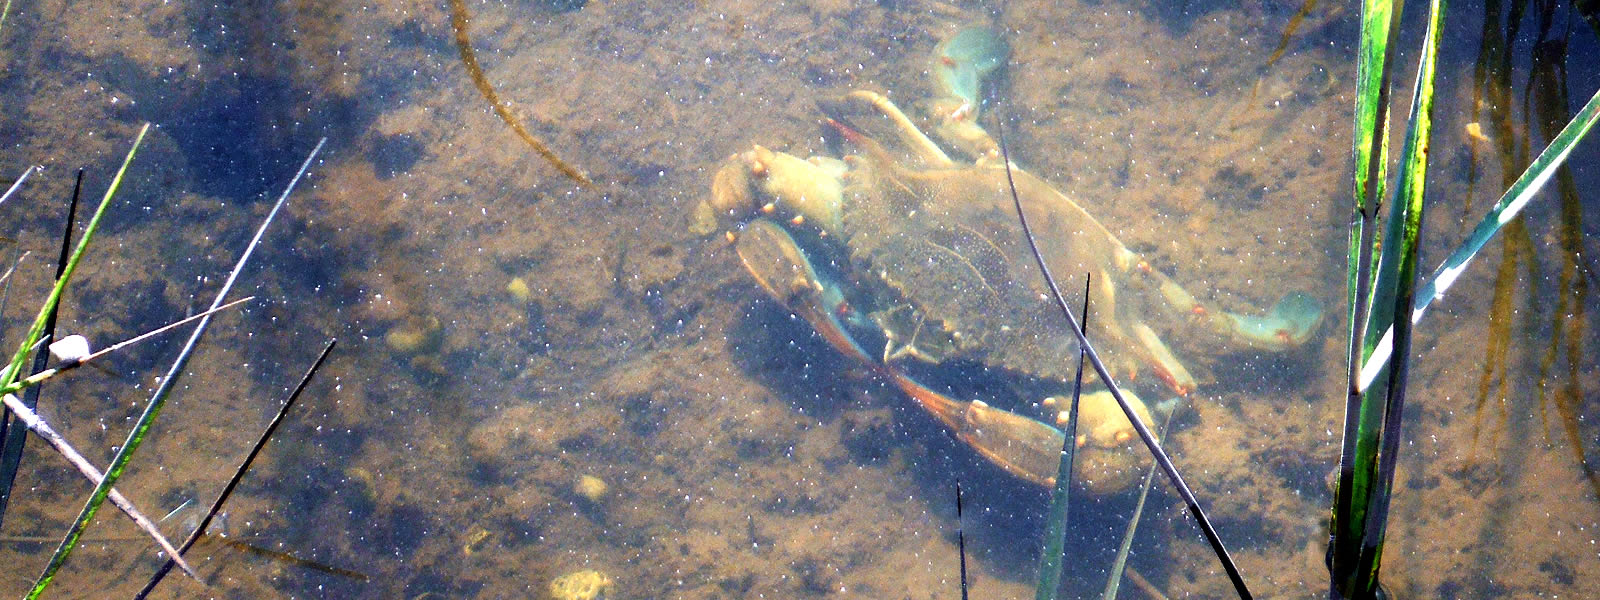 The Blue Crab Callinectes sapidus submerged in water around grass and reeds